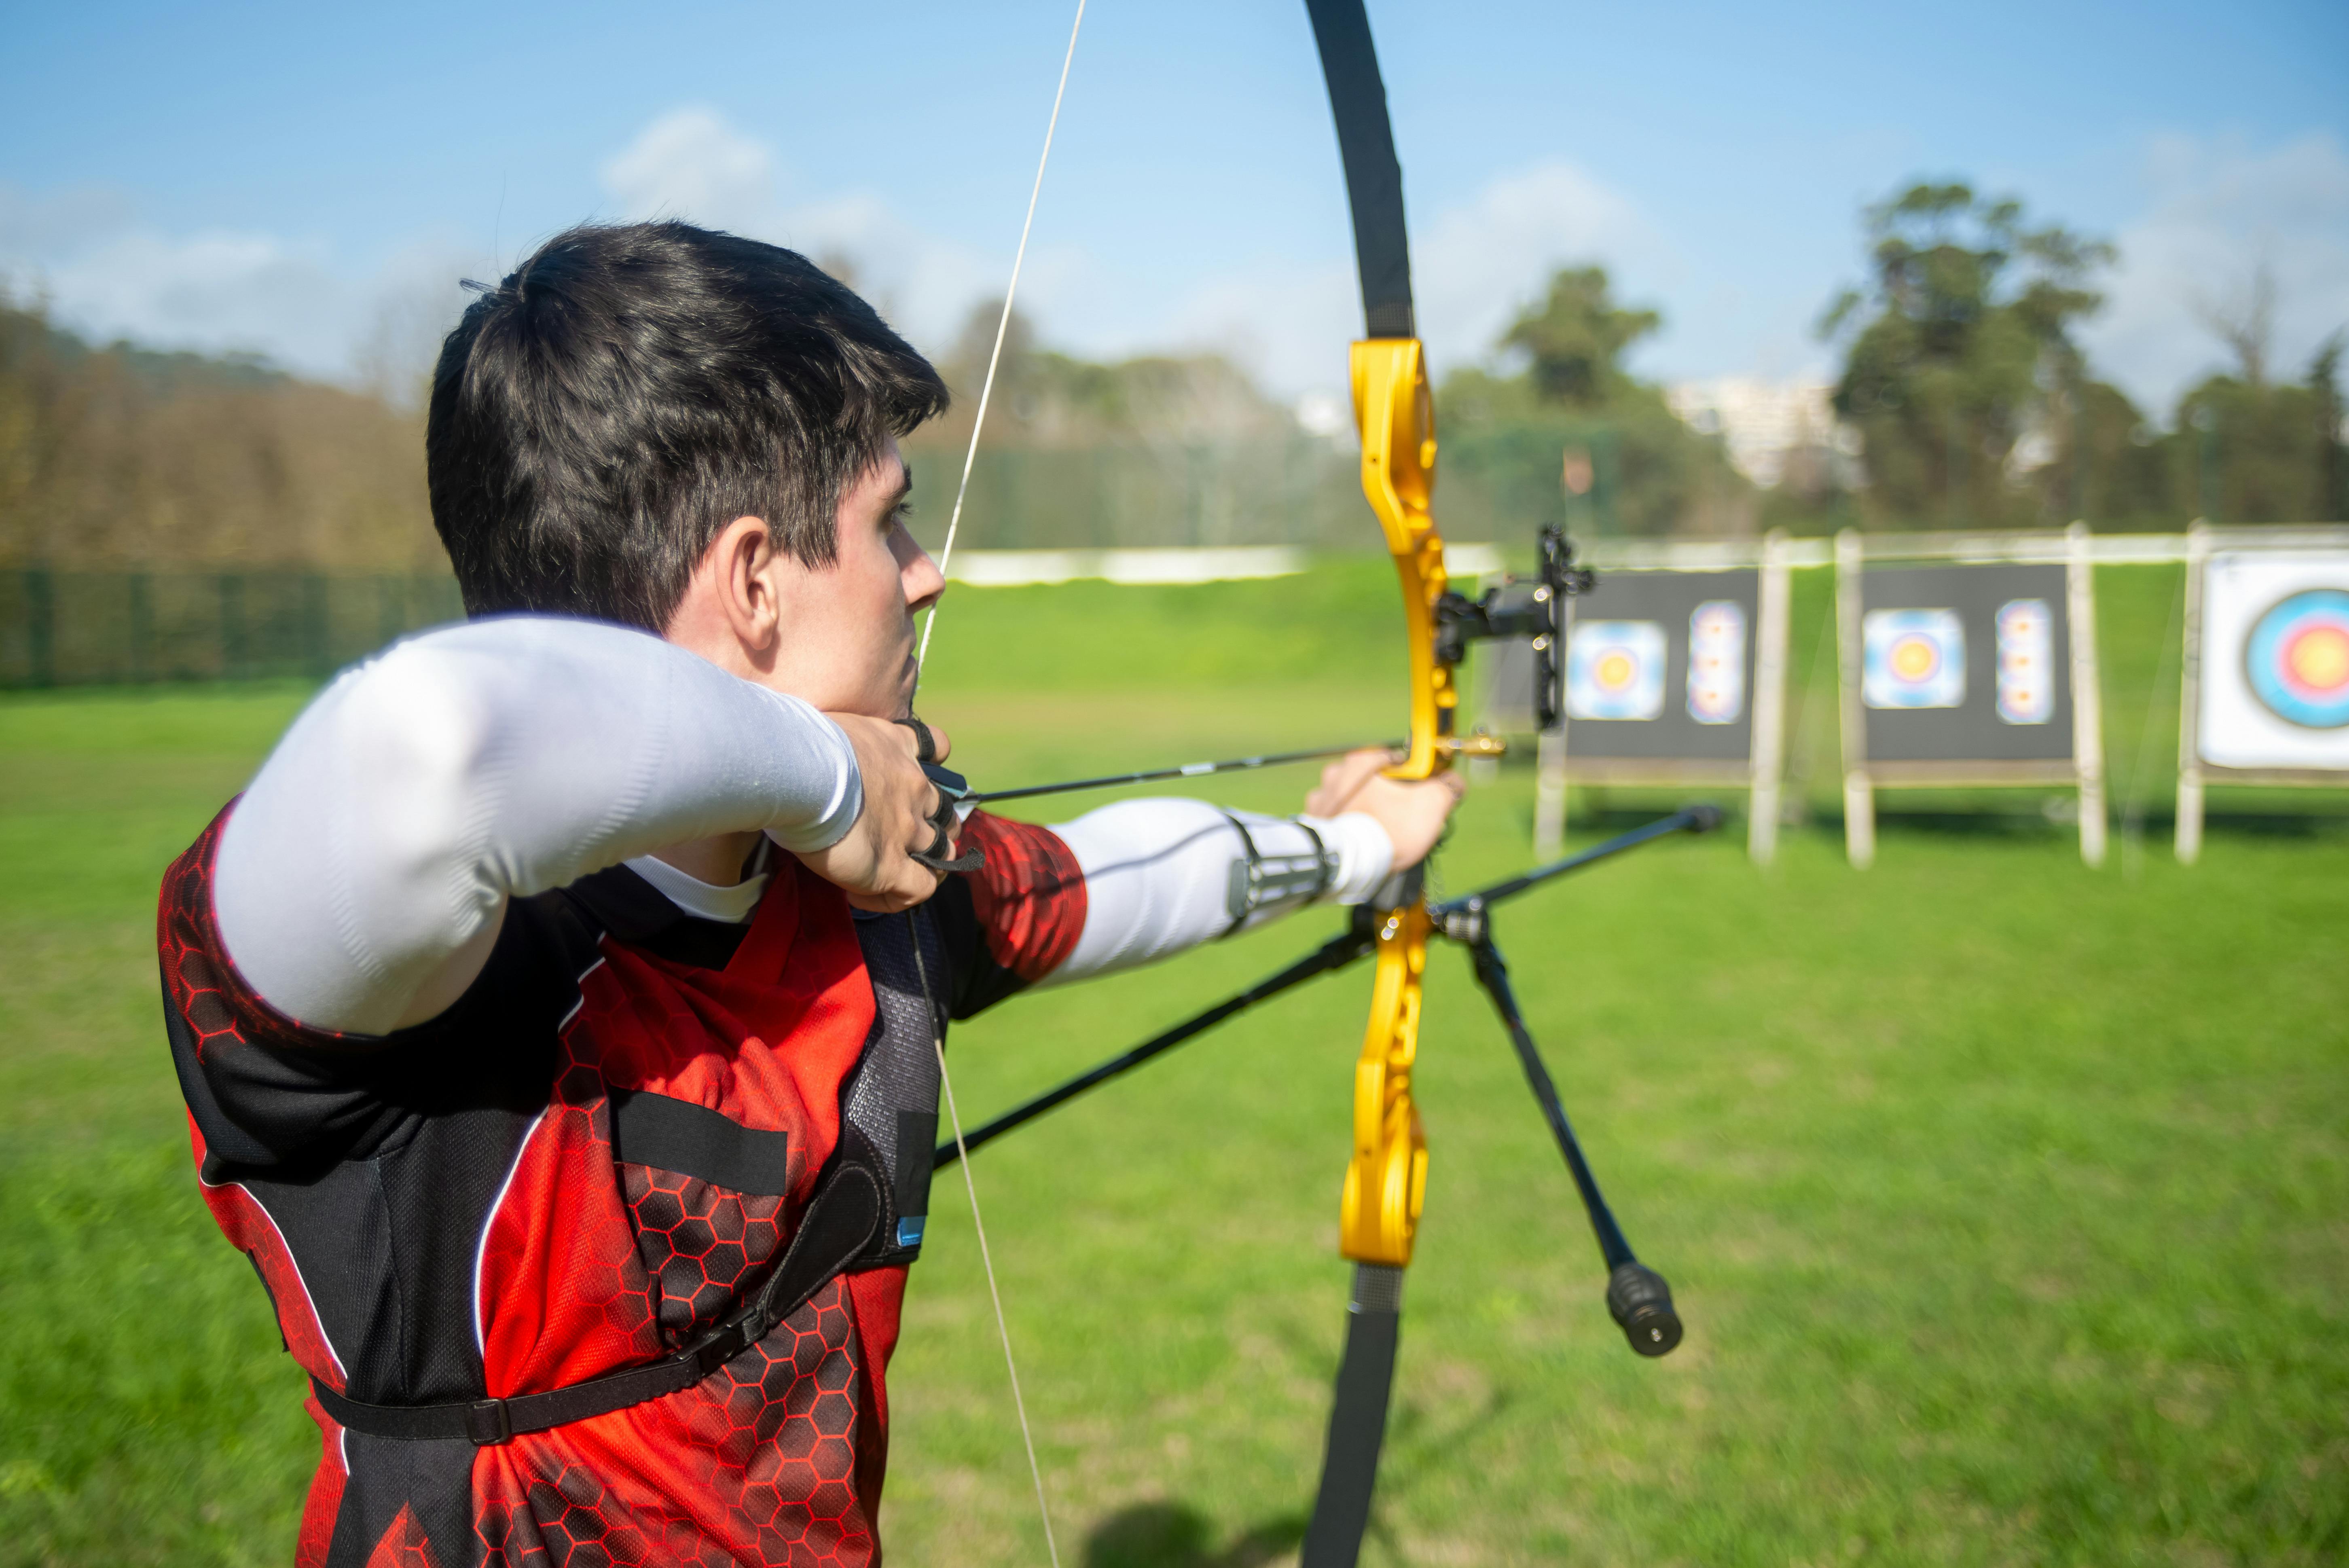 Archery Photos, Download The BEST Free Archery Stock Photos and HD Images